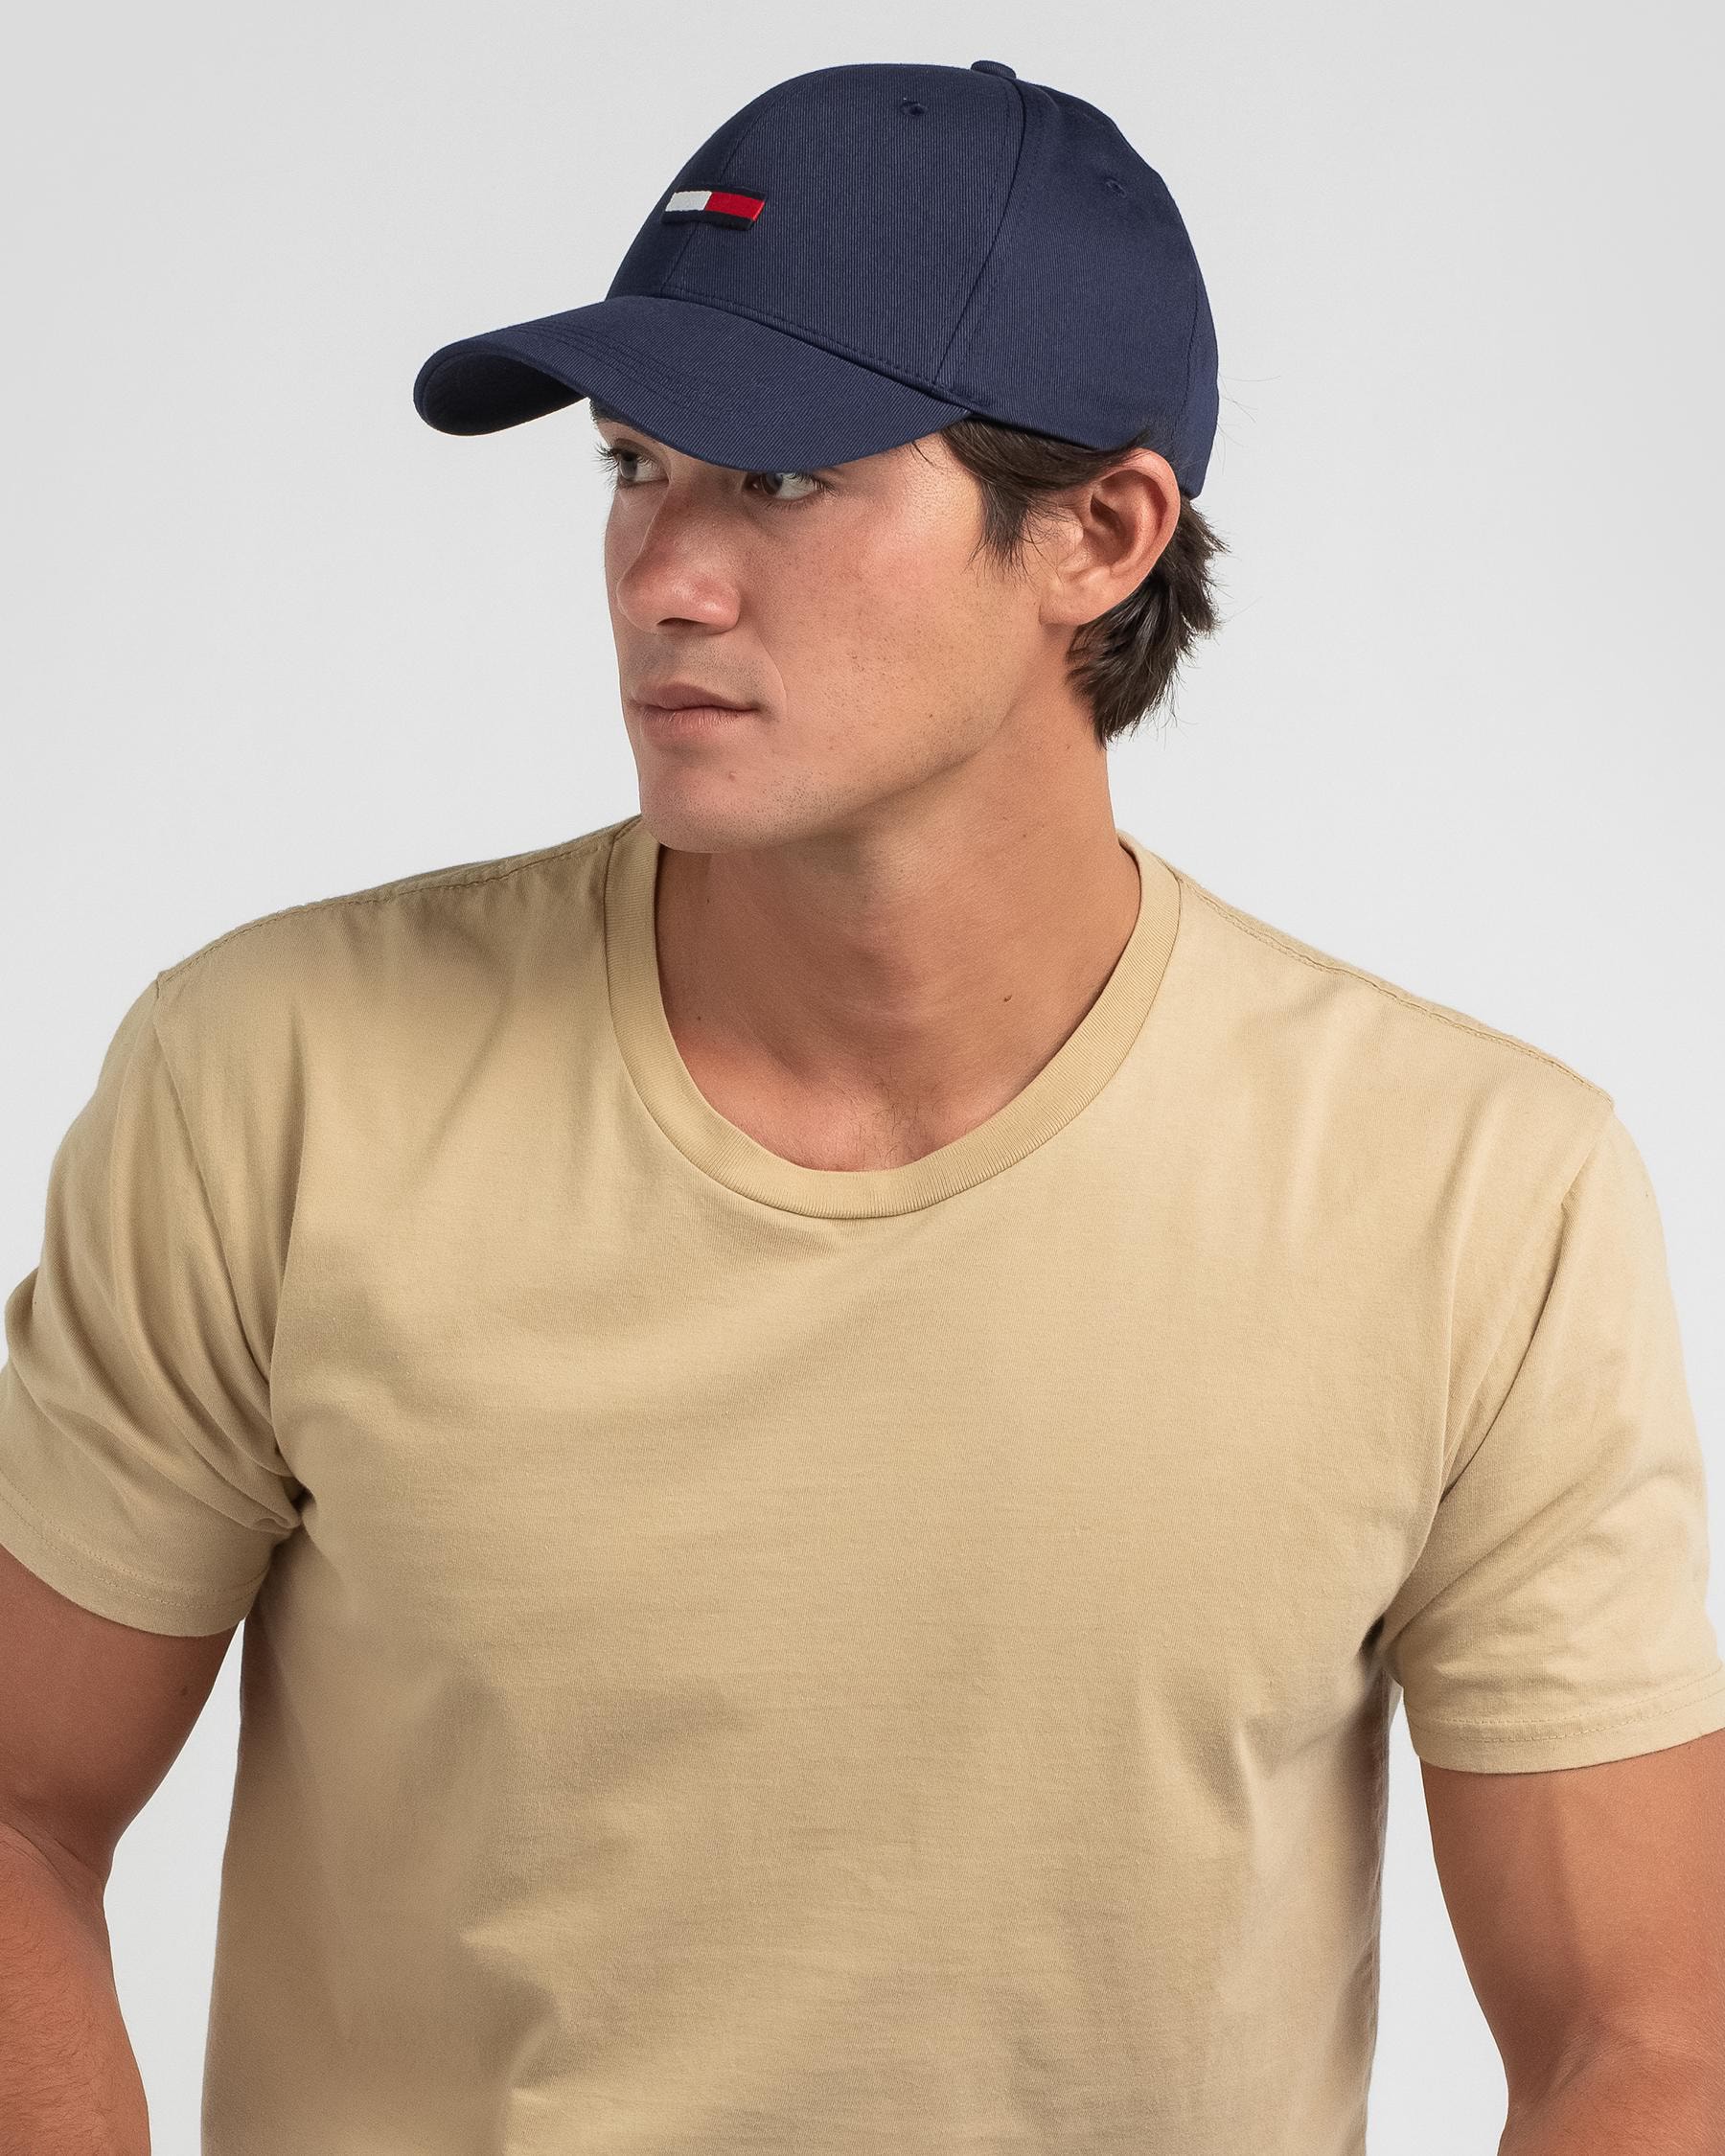 Tommy Hilfiger TJM Returns Shipping Beach Cap FREE* Twilight - & Easy City United Flag - In States Navy